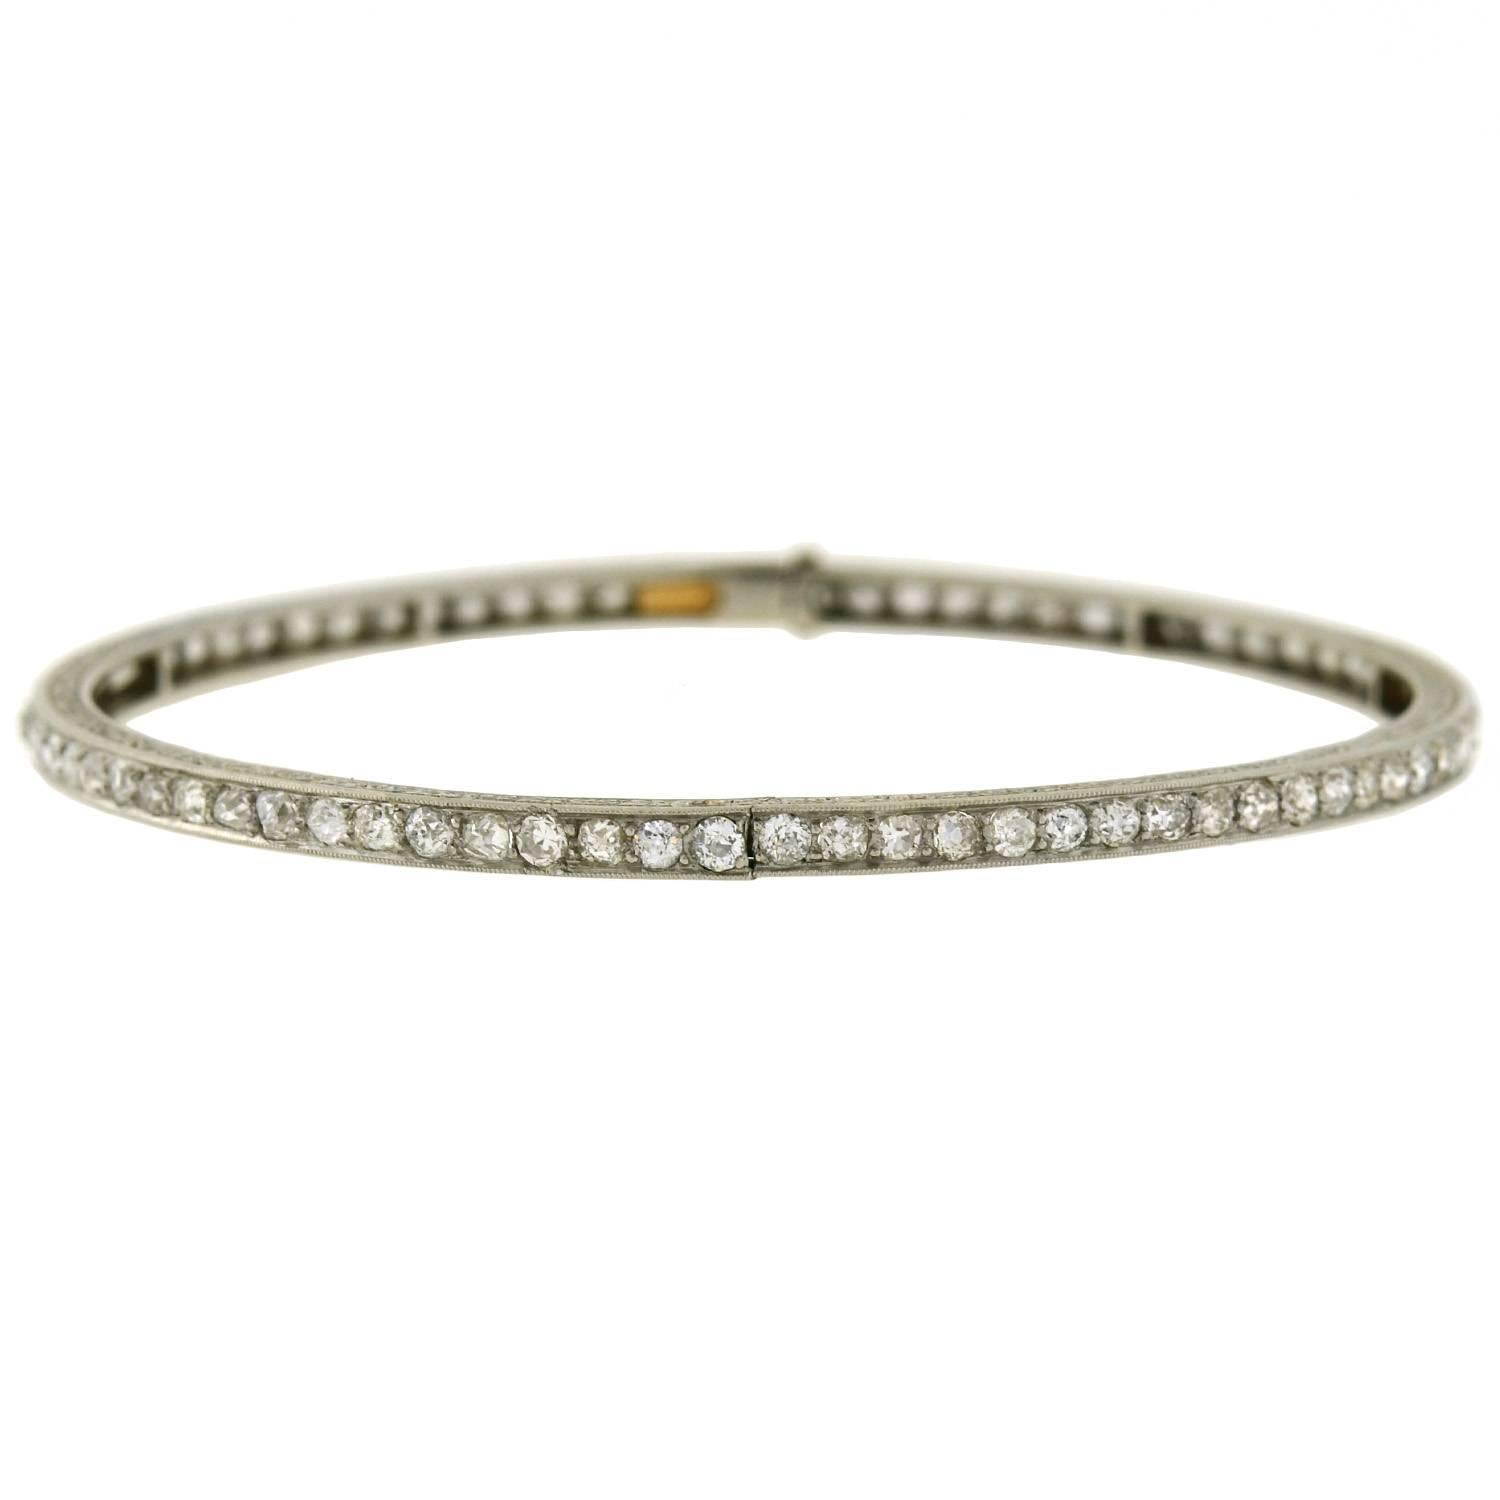 A beautiful diamond bracelet from the Edwardian (ca1910) era! This stunning piece is crafted in platinum, and lined with sparkling mine cut diamonds. The pavé setting creates a continuous glittering row of stones, which weigh approximately 5.00ctw